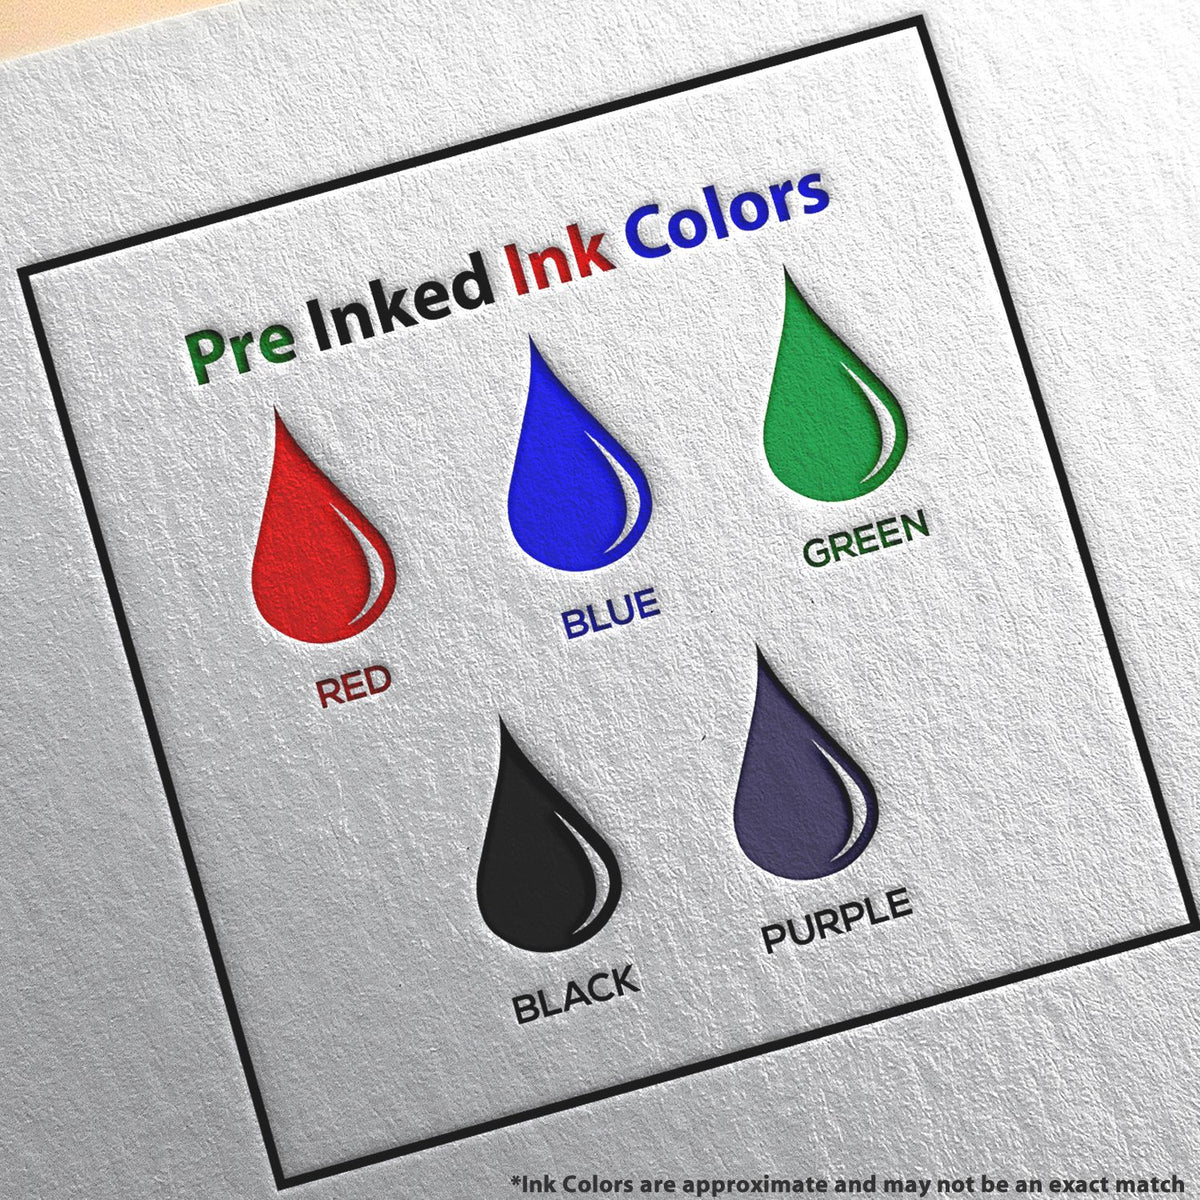 A picture showing the different ink colors or hues available for the Slim Pre-Inked Rectangular Notary Stamp for Puerto Rico product.